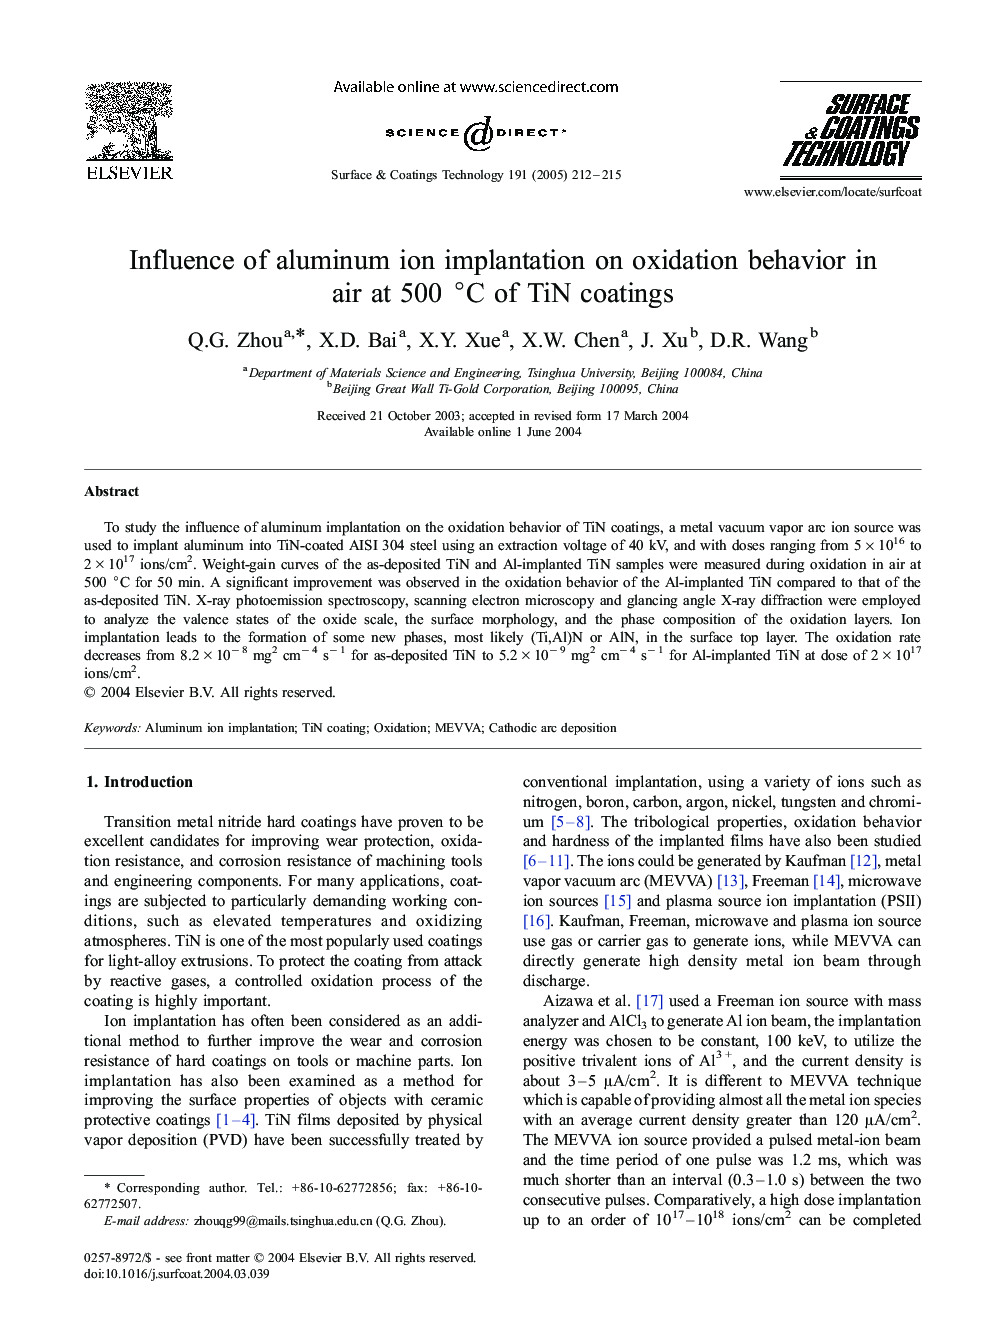 Influence of aluminum ion implantation on oxidation behavior in air at 500 Â°C of TiN coatings